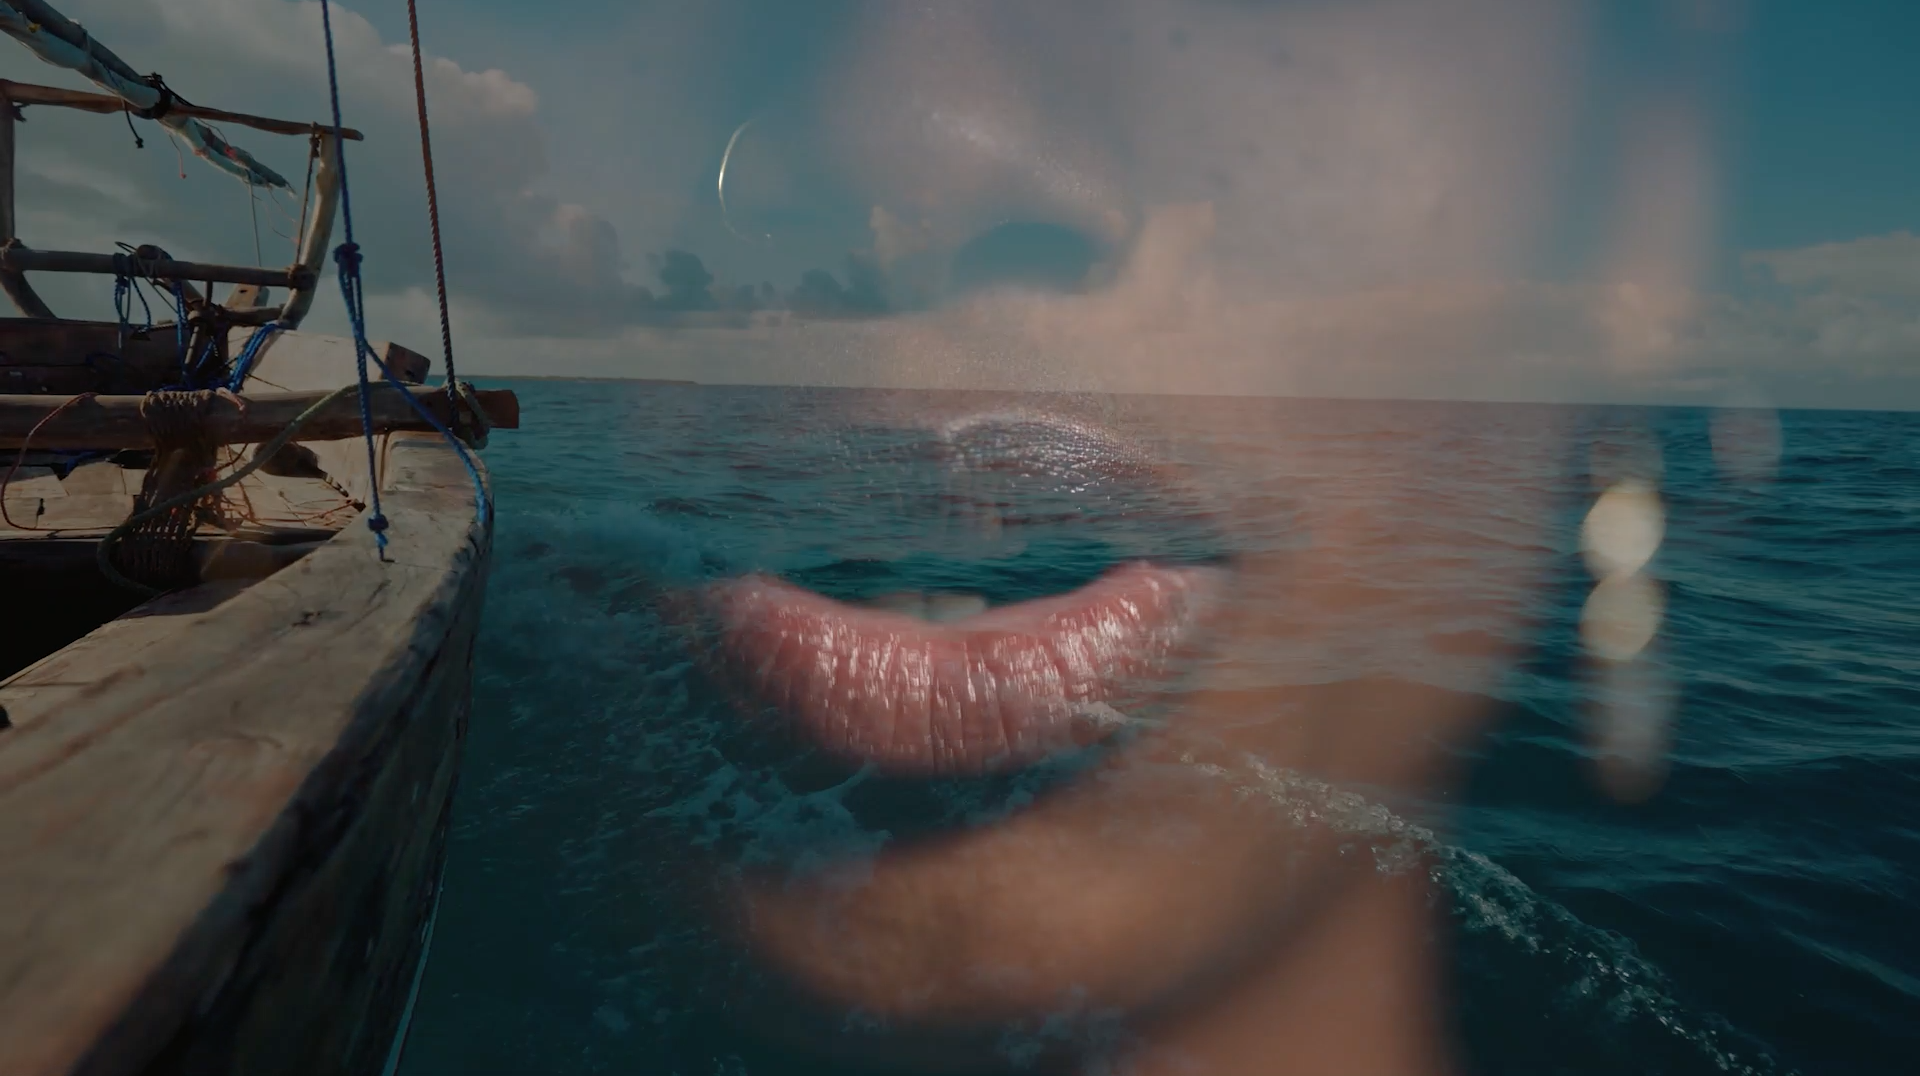 " A non binary Black African person’s mouth slightly open. This is overlayed over the prow of wooden over a turquoise ocean and blue sky on the horizon"